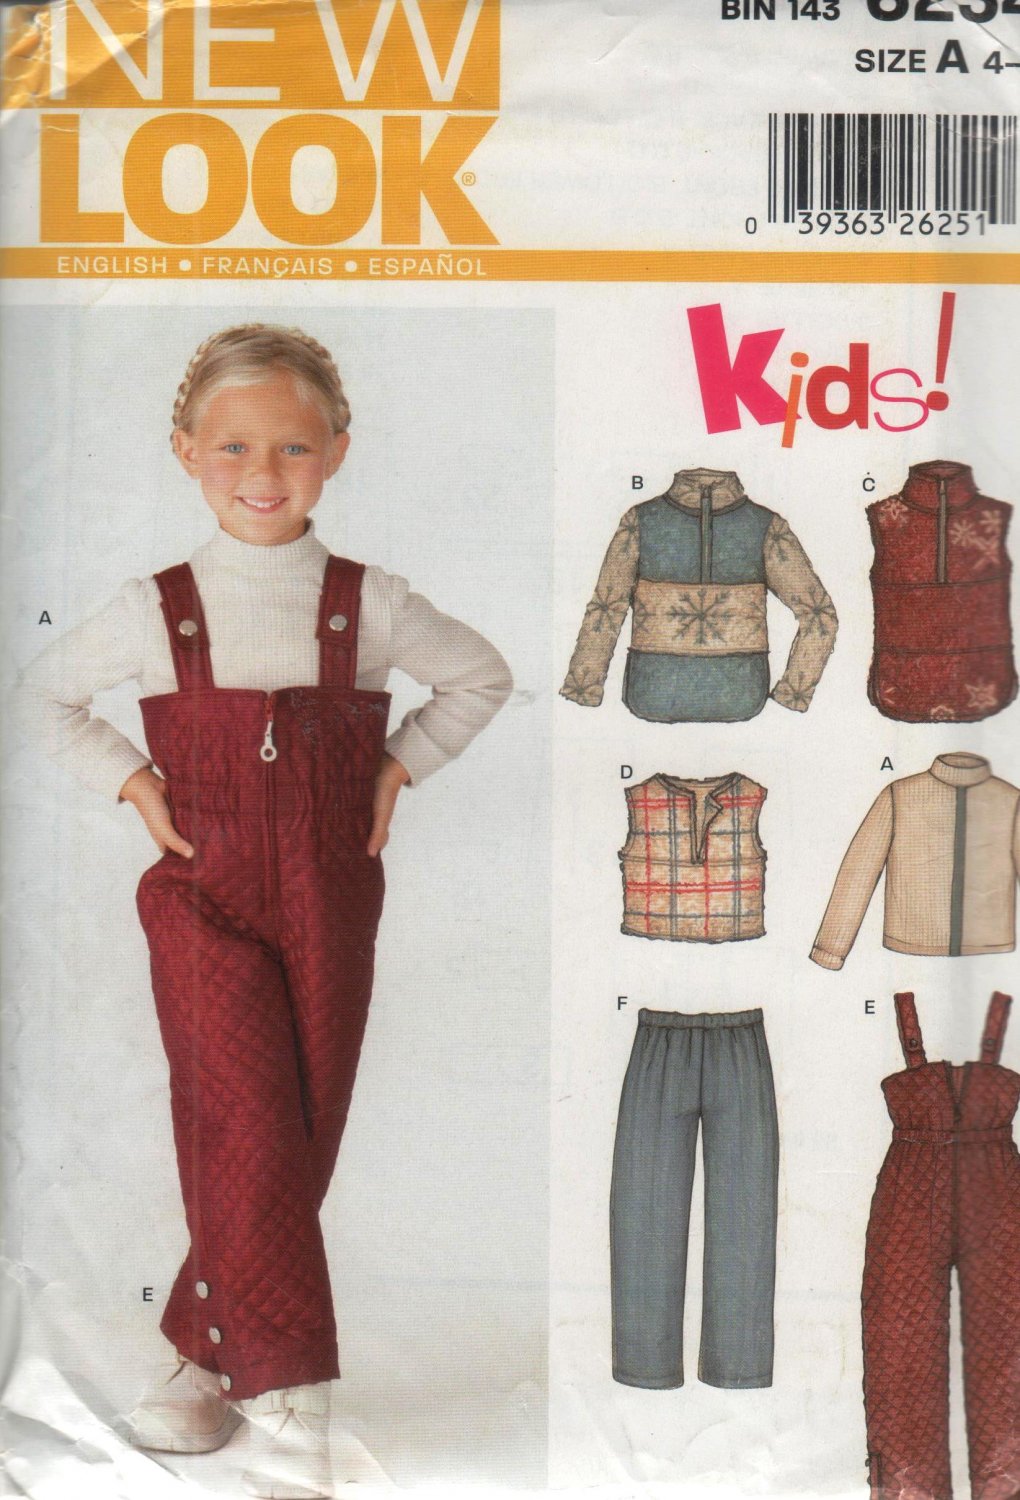 New Look 6234 Sewing Pattern Child Jacket, vest, pants, Size A 4-9